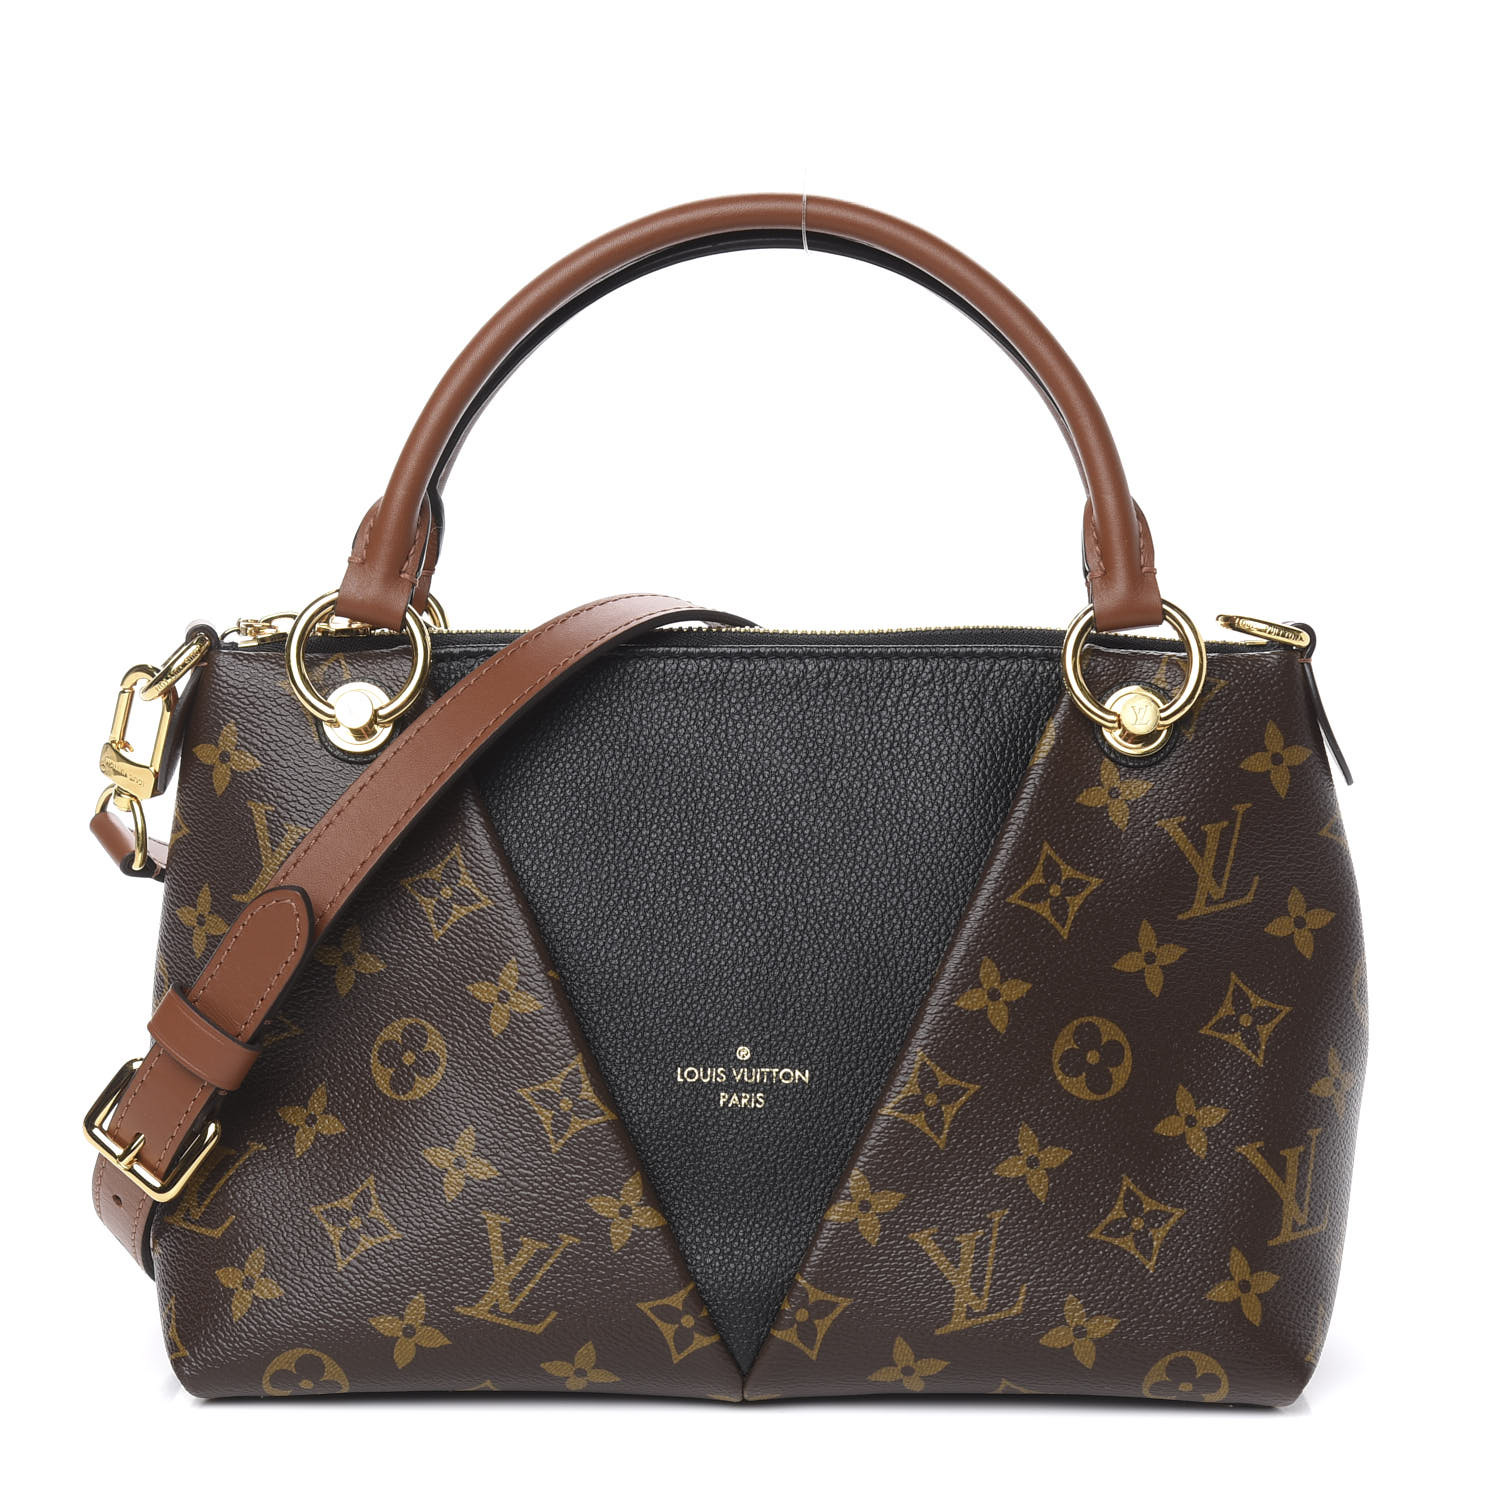 What's In My Bag! Louis Vuitton Monogram V Tote